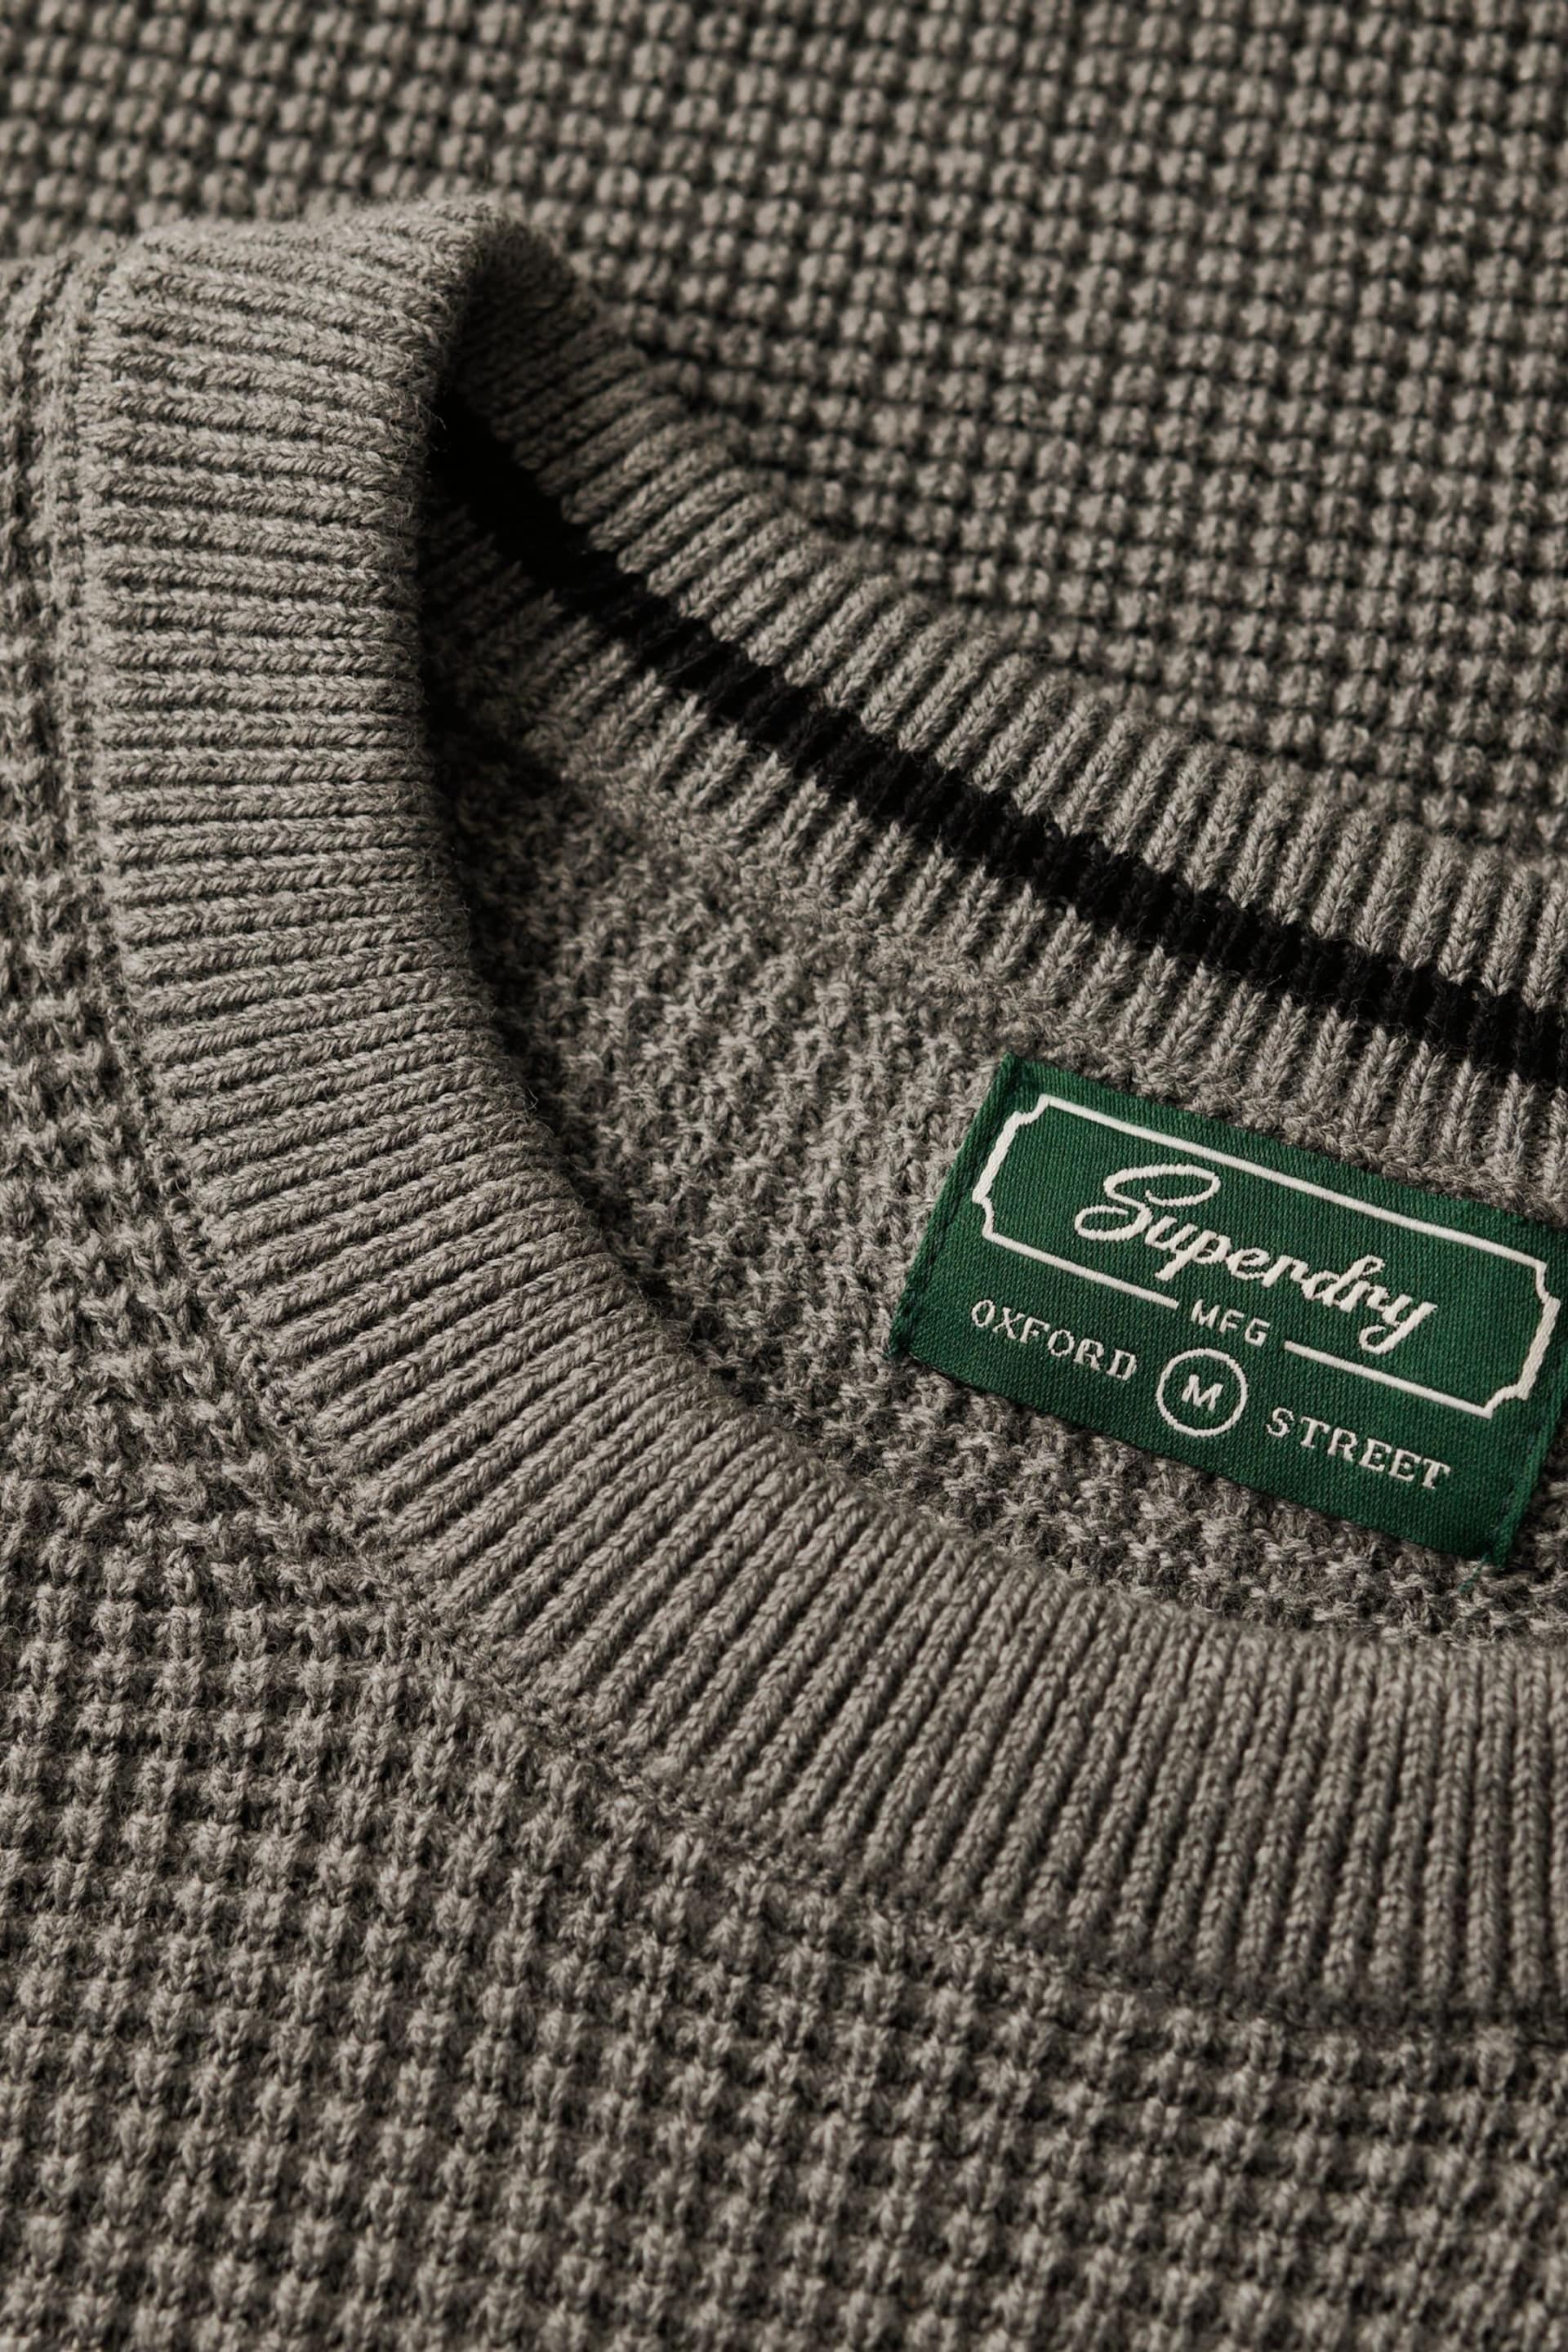 Superdry Grey Textured Crew Knit Jumper - Image 6 of 6